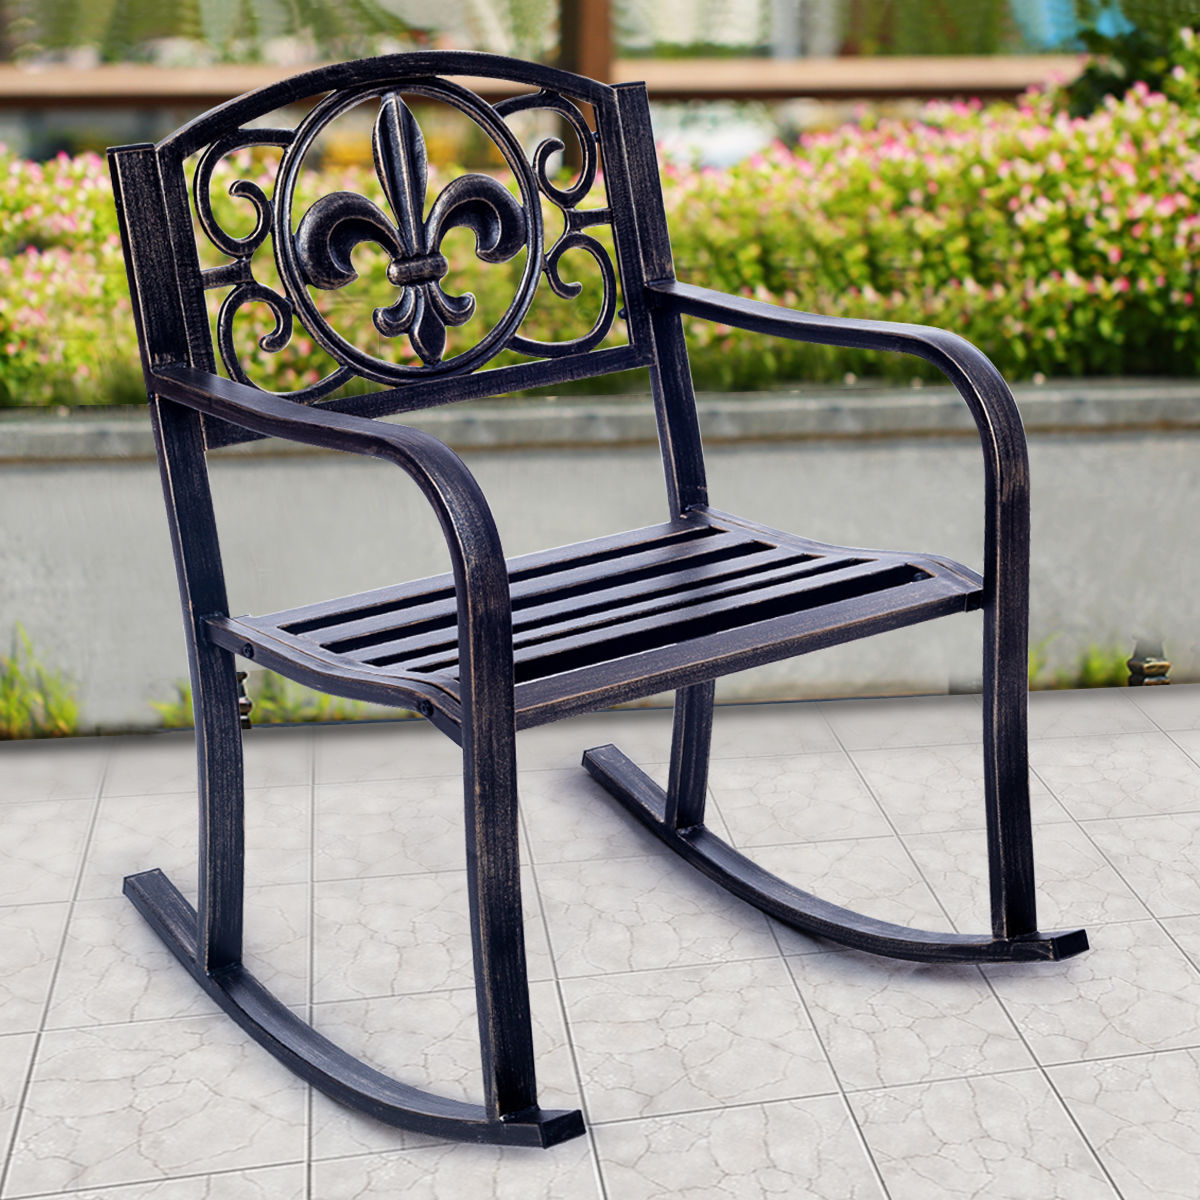 Patio Lawn Garden Outdoor Patio Iron Scroll Rocker Chair intended for sizing 1200 X 1200